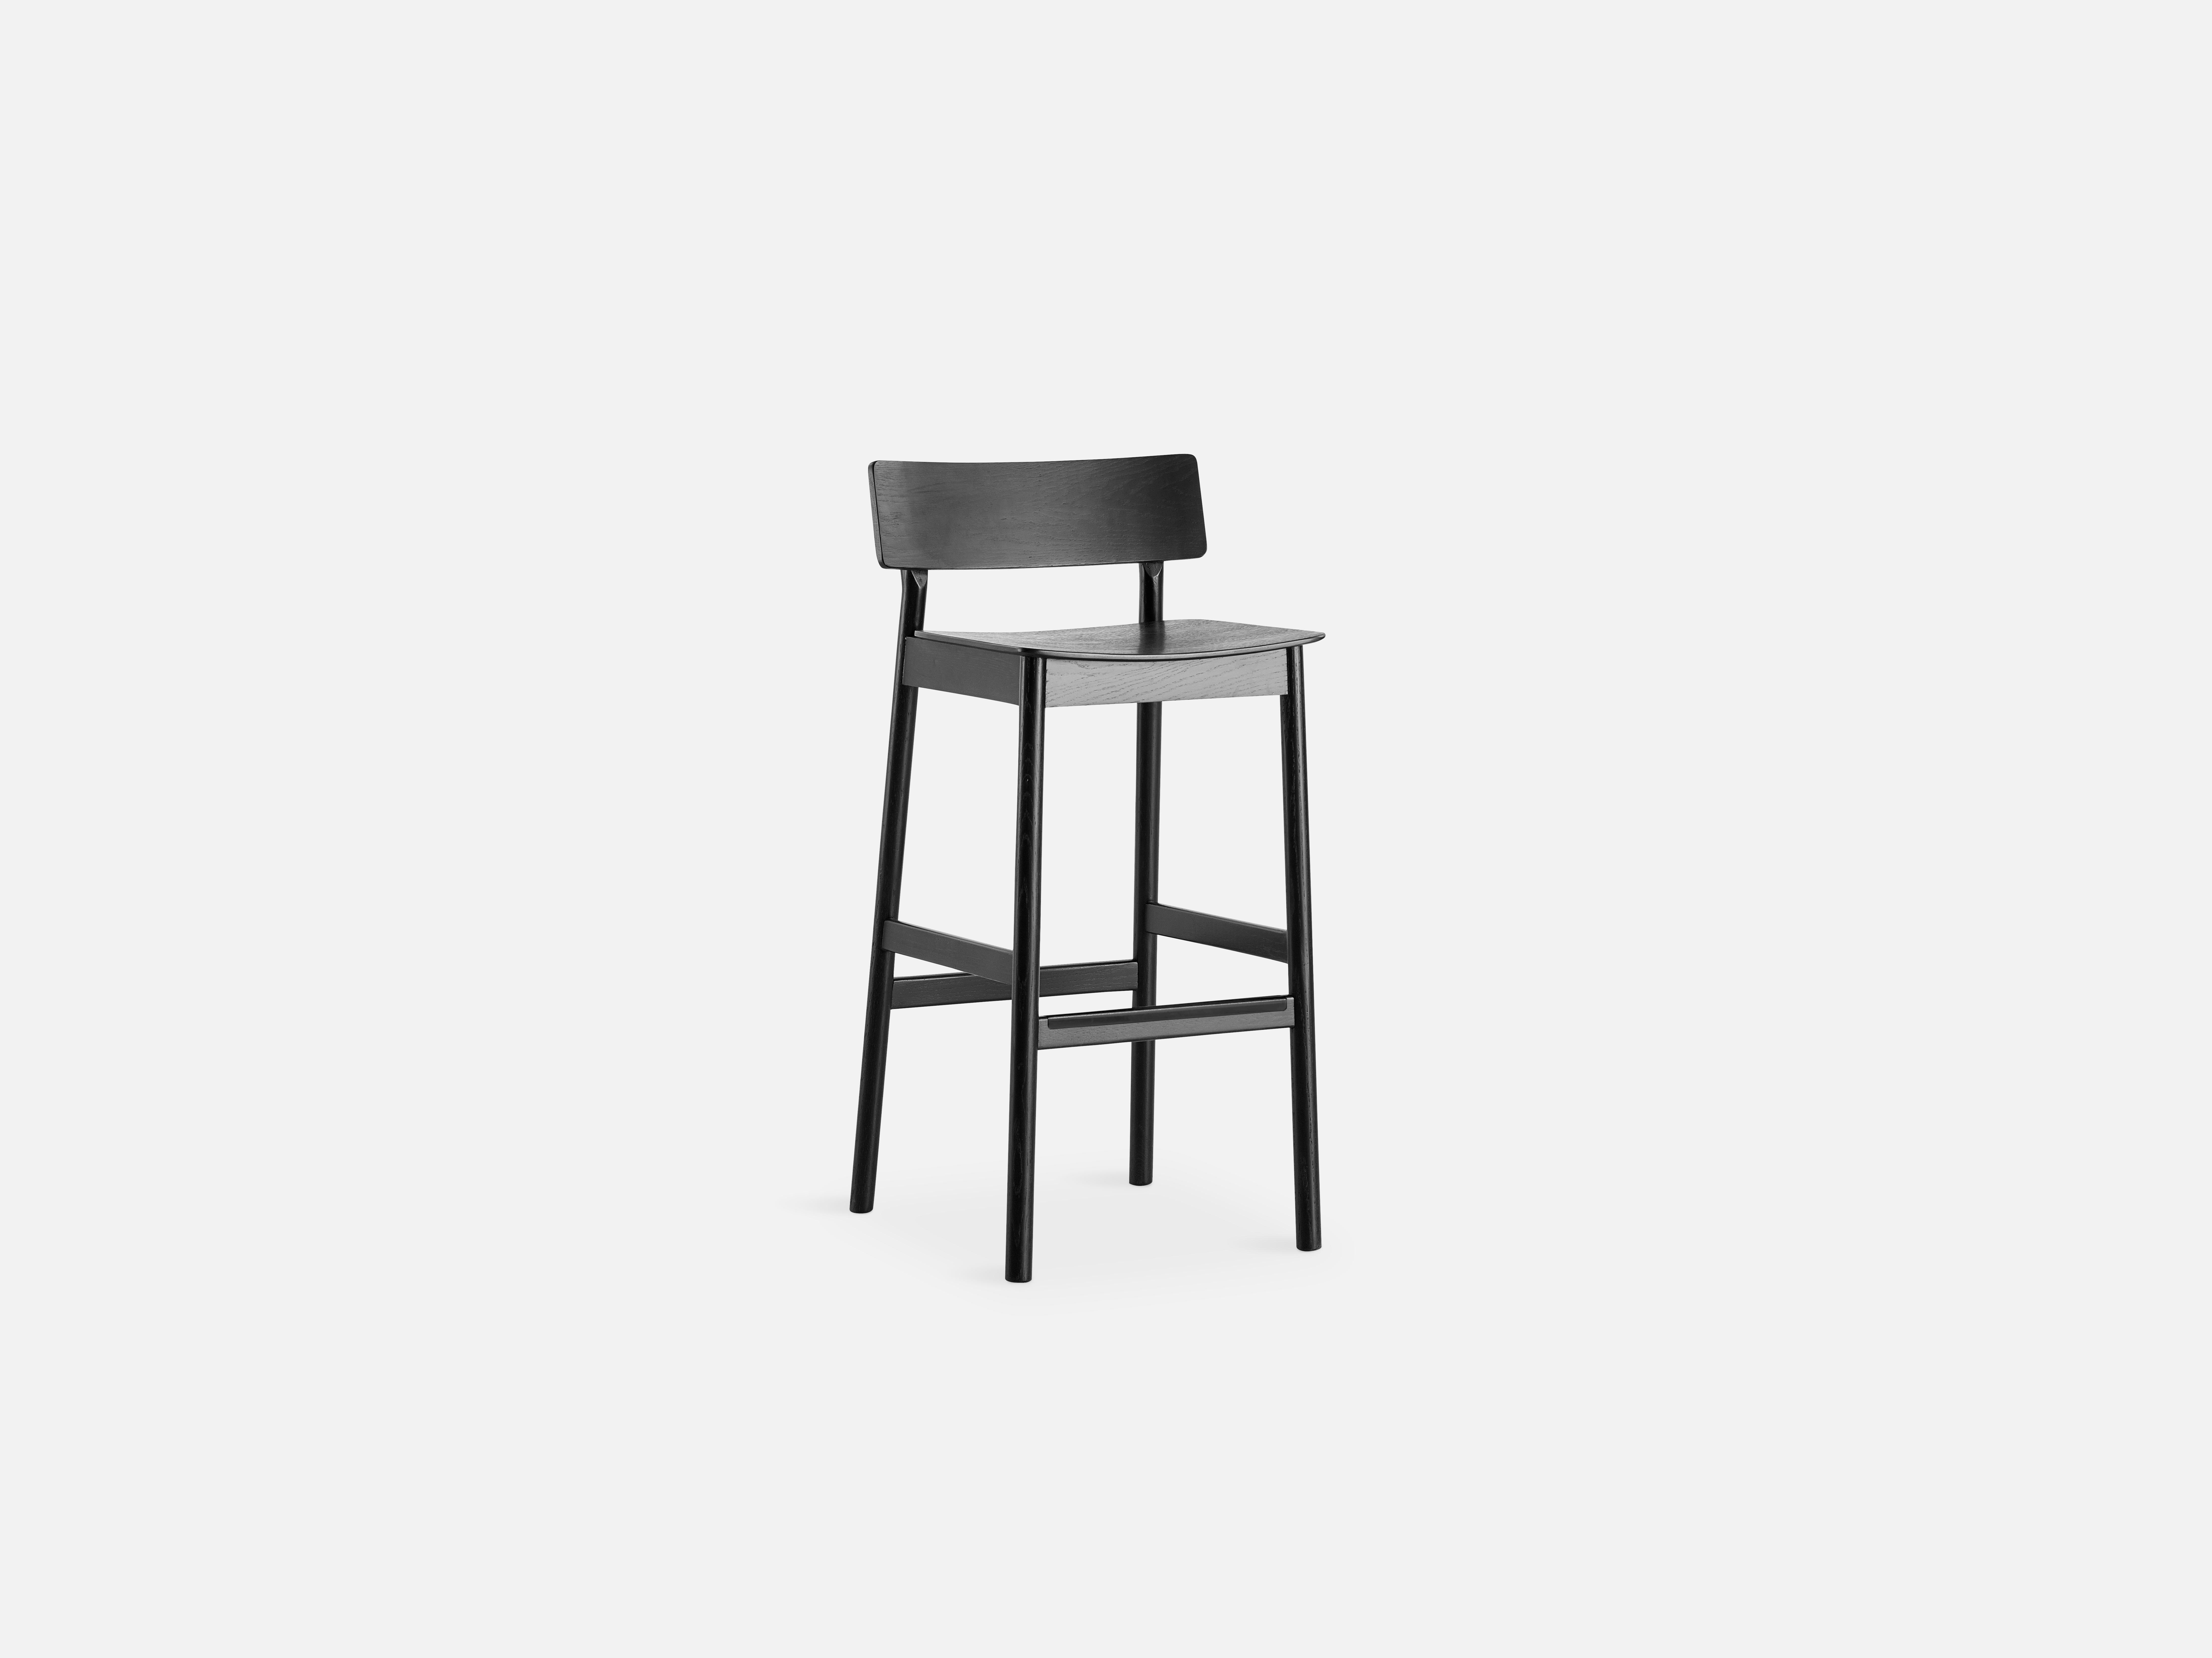 Pause black bar stool 2.0 by Kasper Nyman
Materials: metal, plywood with ash veneer
Dimensions: D 46.5 x W 45.7 x H 95.3 cm

The founders, Mia and Torben Koed, decided to put their 30 years of experience into a new project. It was time for a